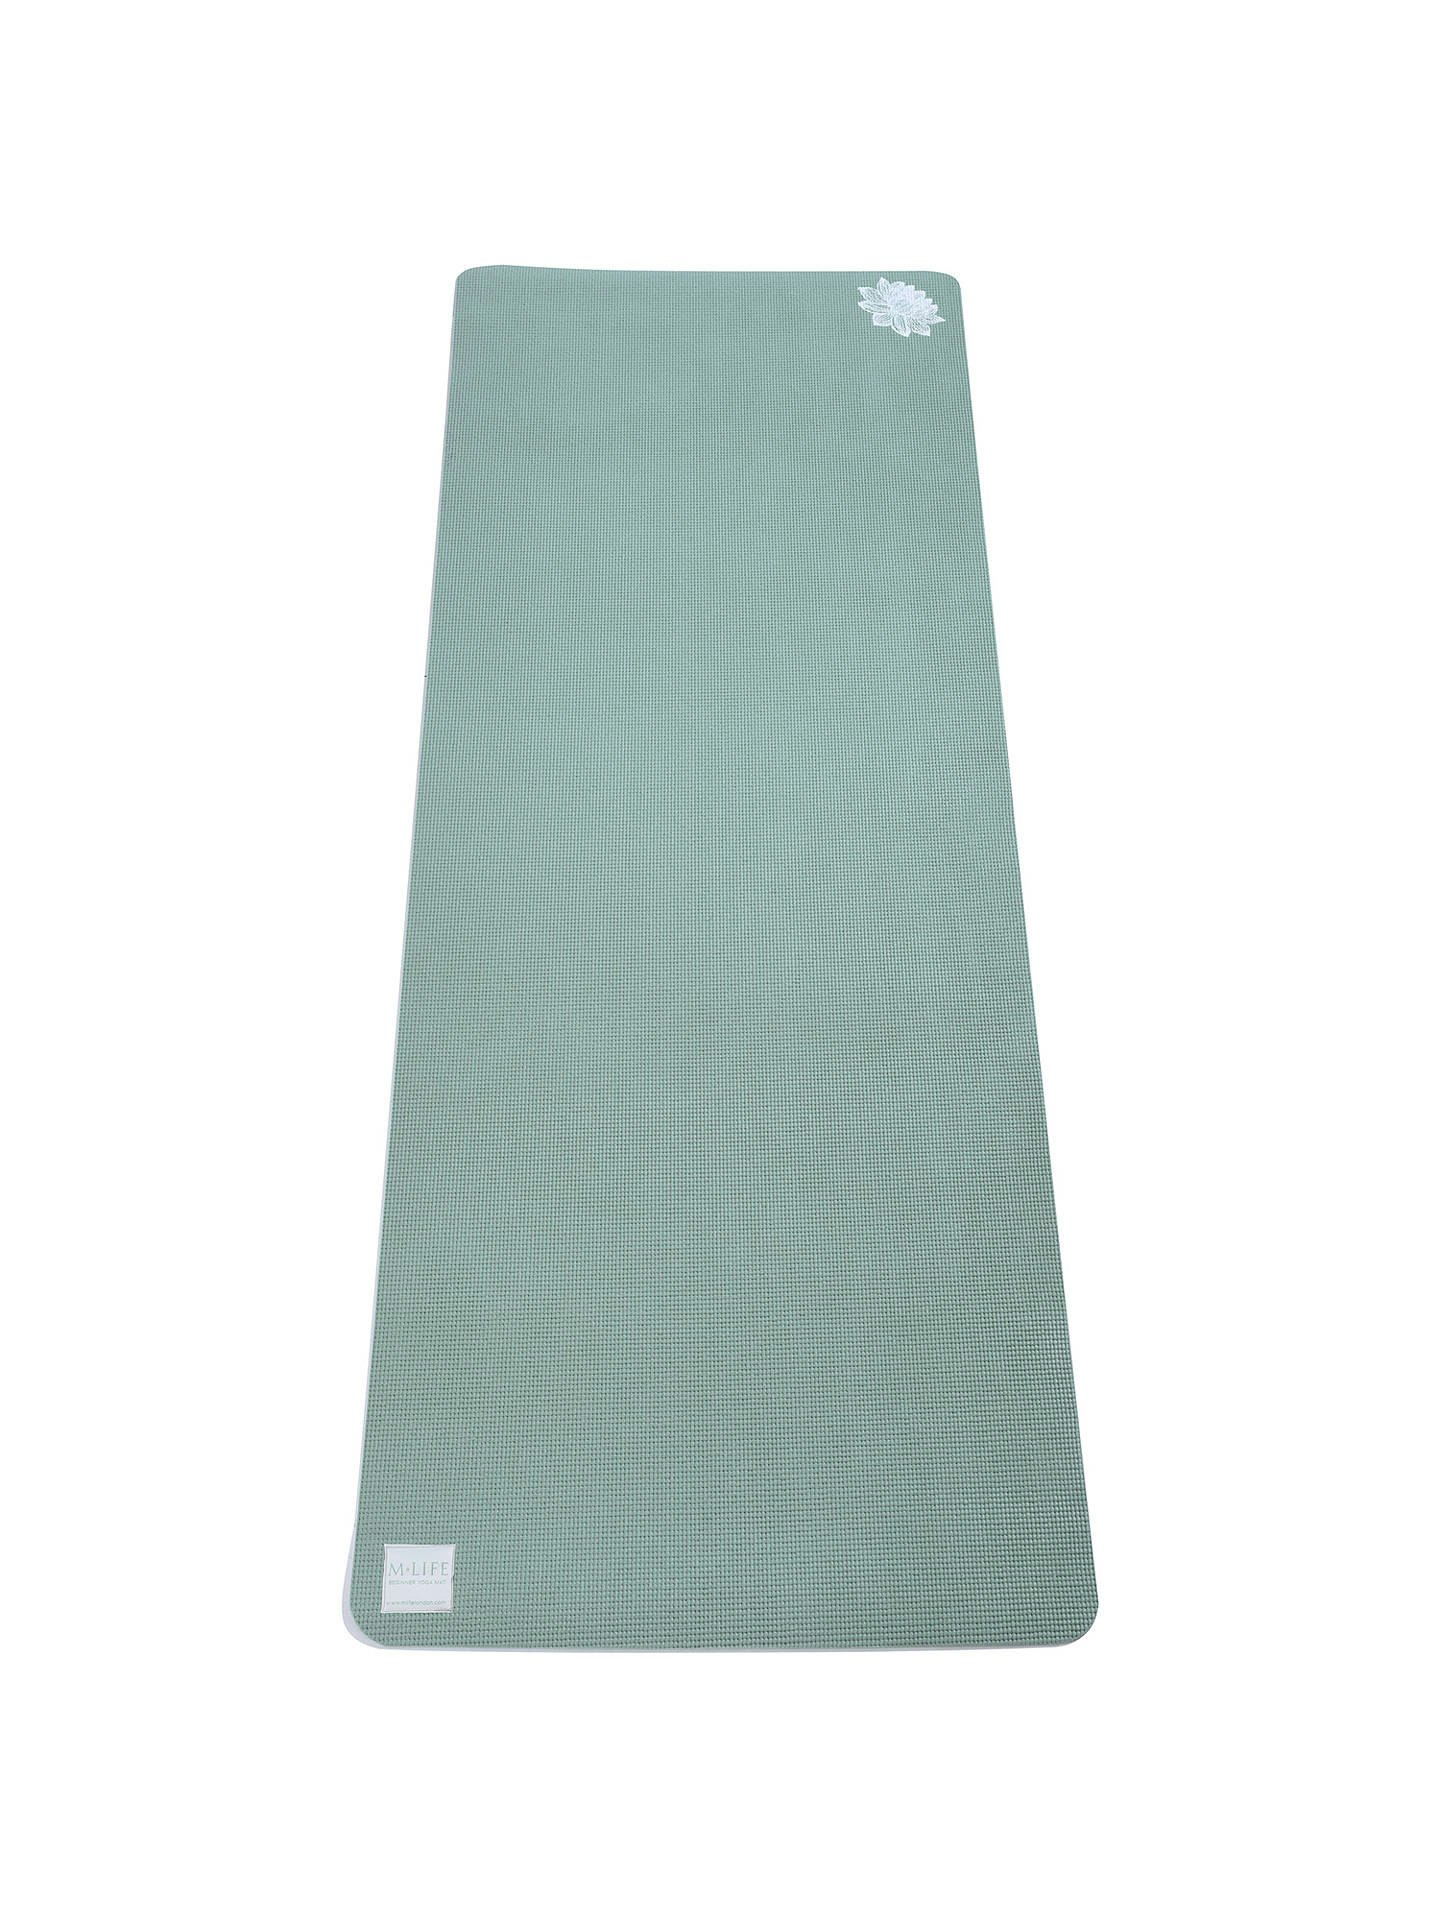 Best Eco Yoga Mats 2022 For A Non-Slip Workout